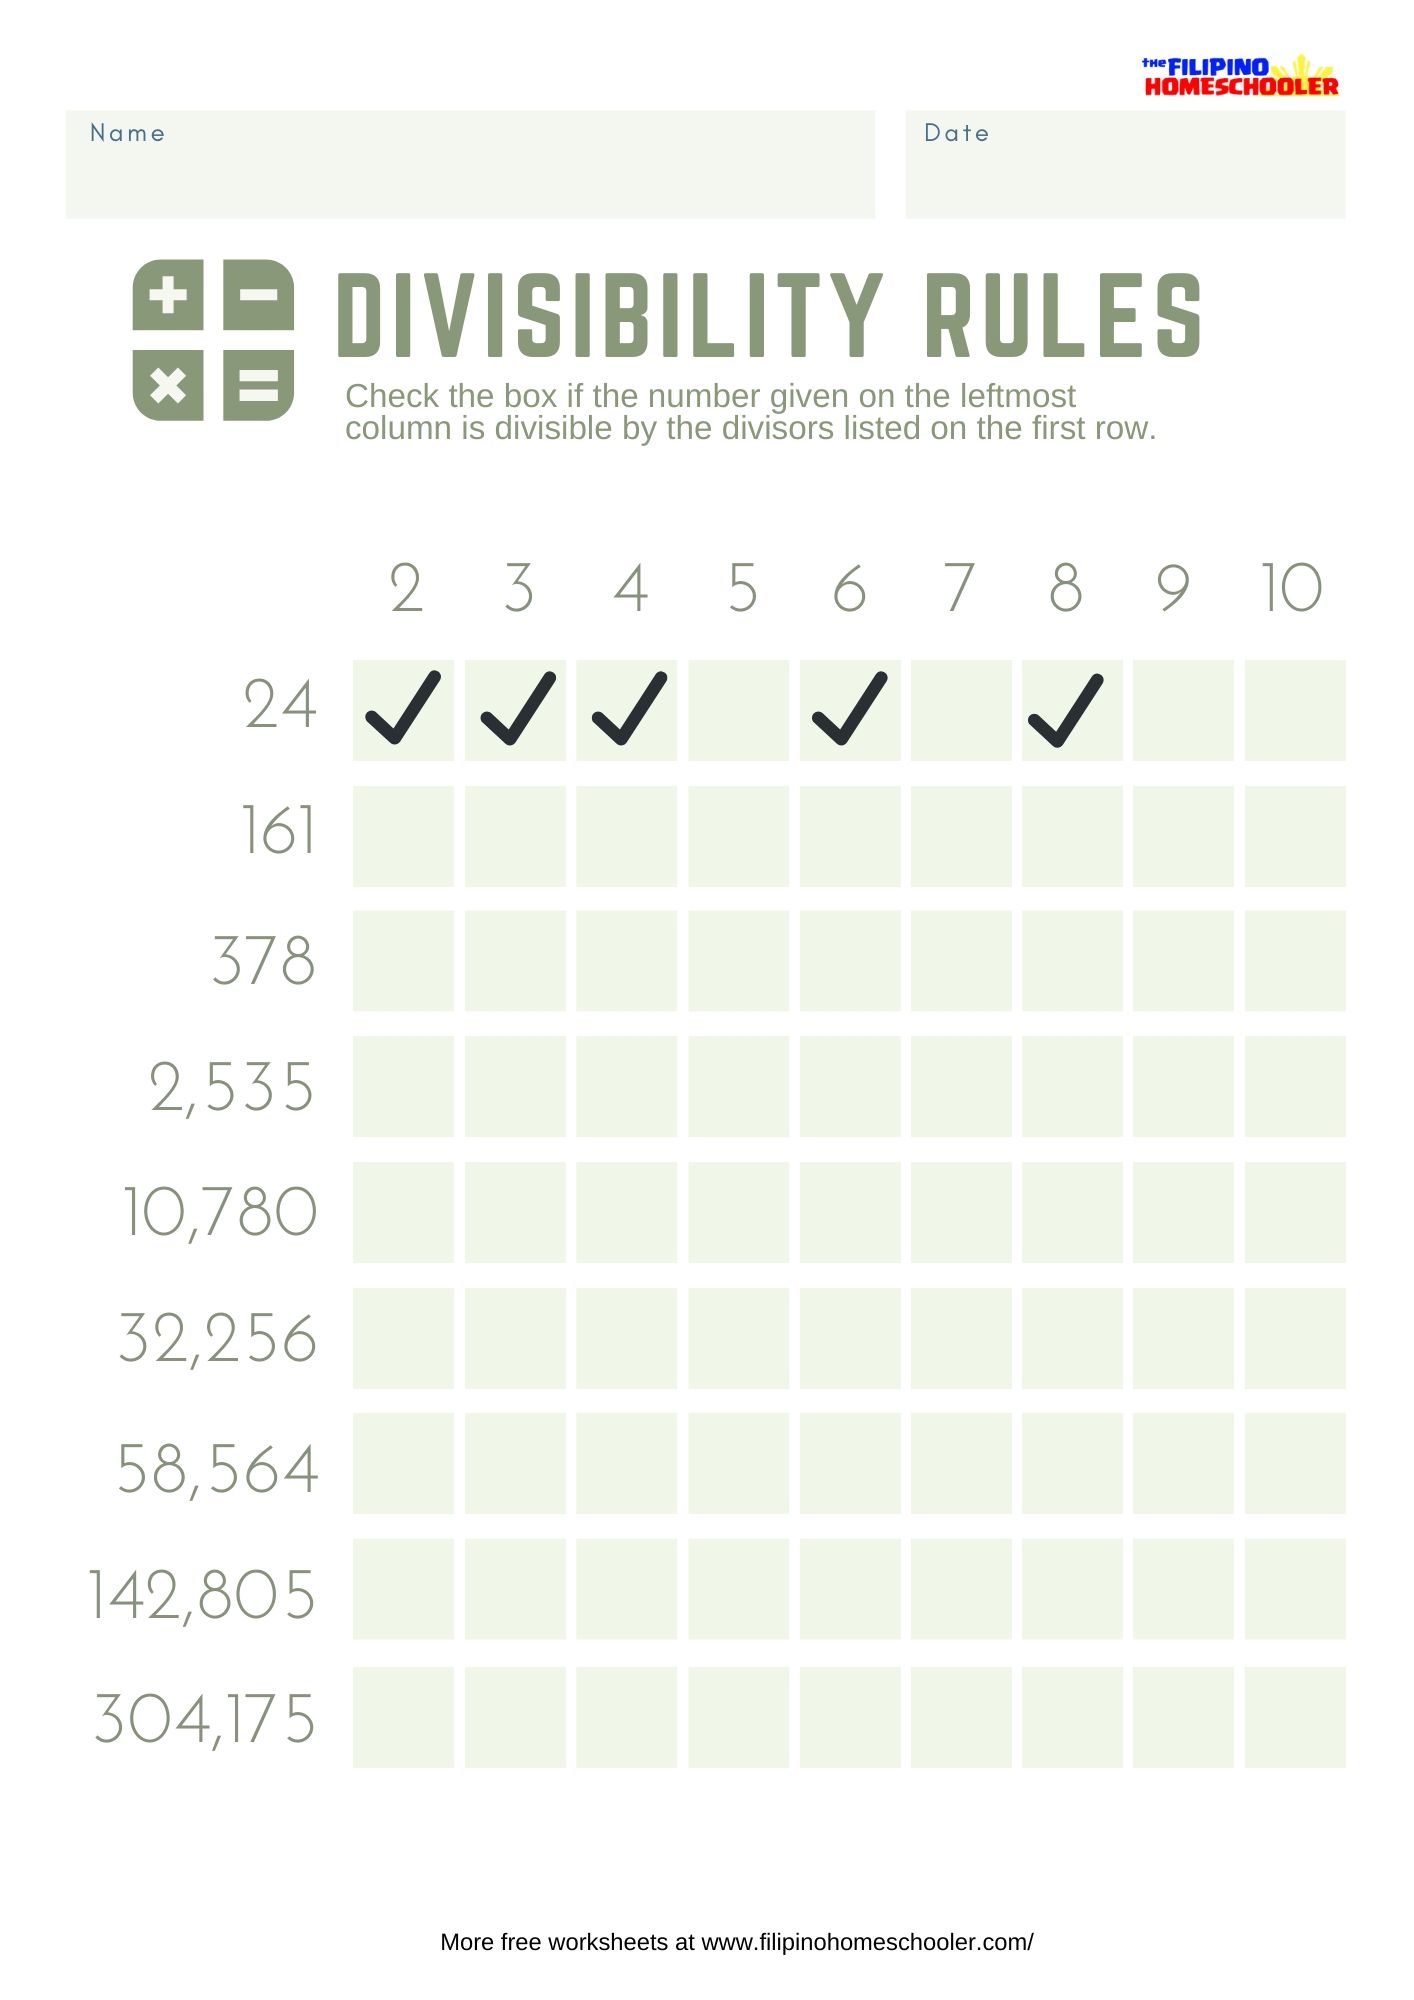 divisibility-rules-worksheet-free-upsky